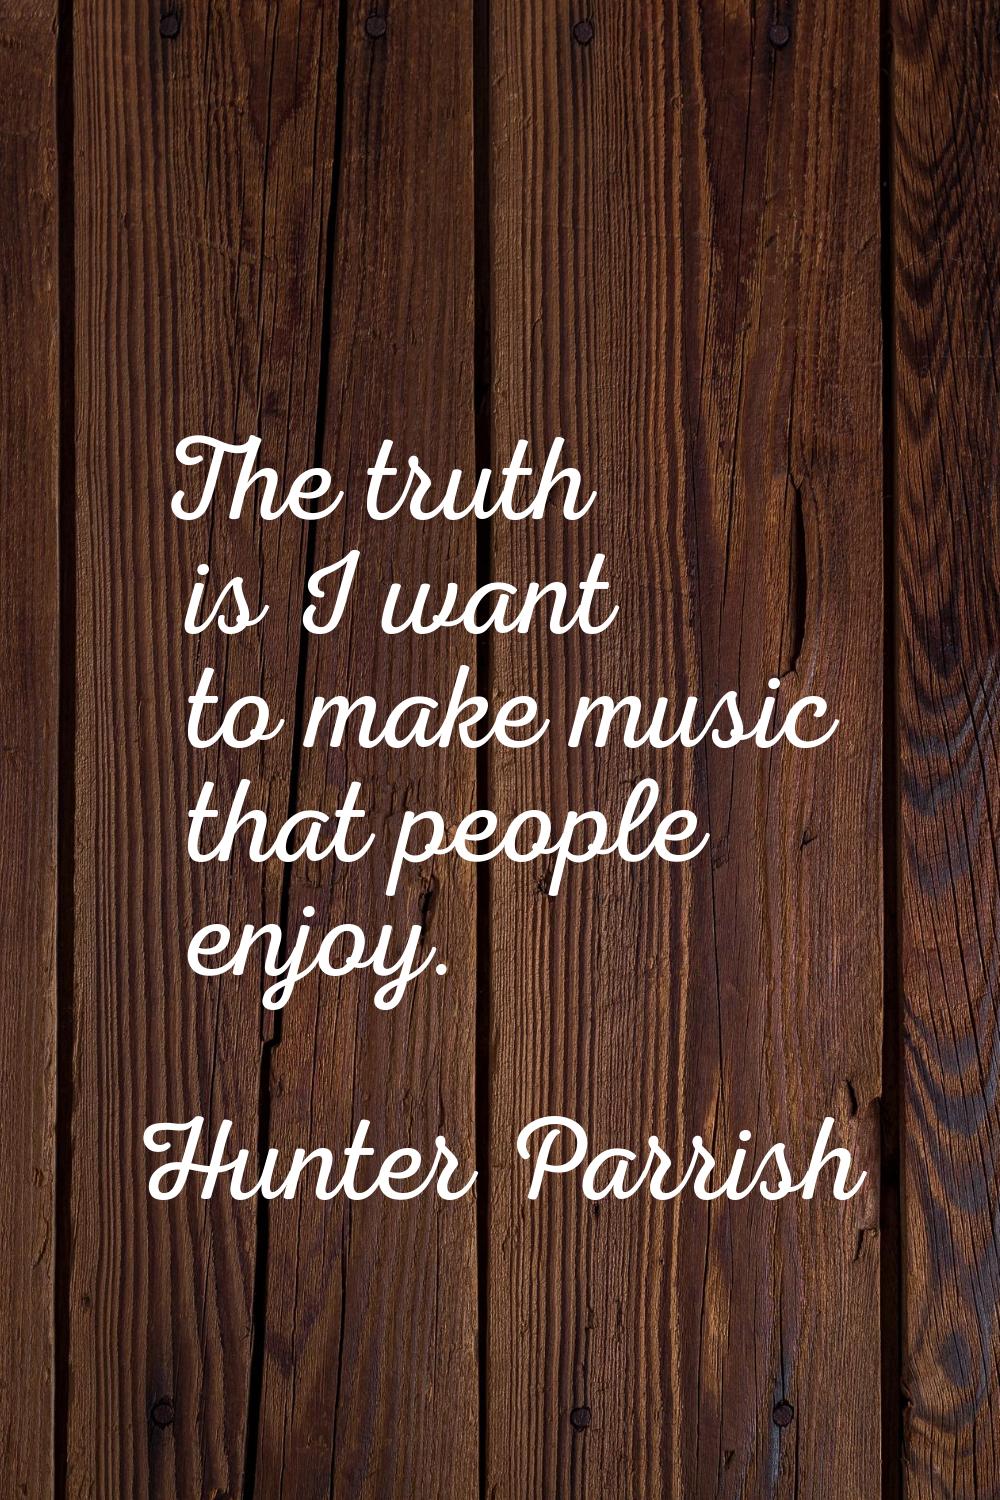 The truth is I want to make music that people enjoy.